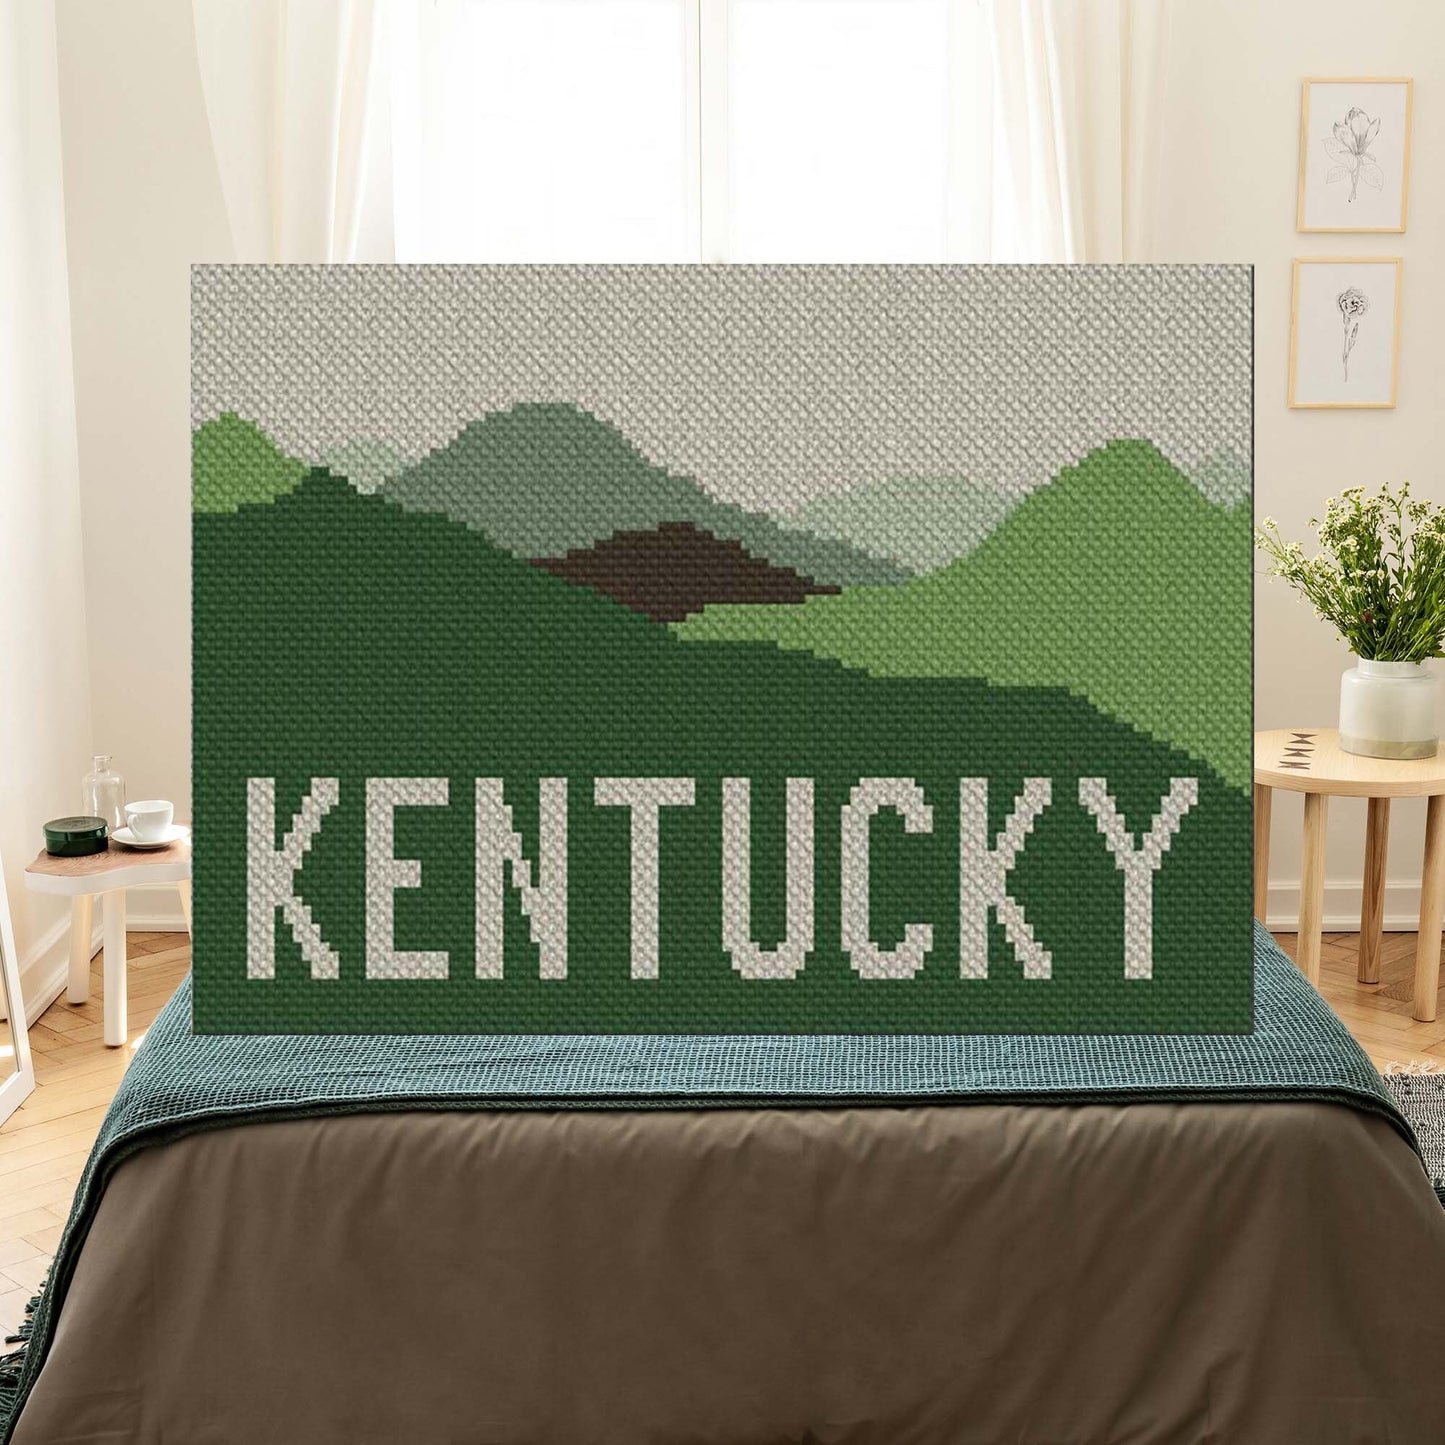 Go to the Mountains of Kentucky C2C Crochet Pattern